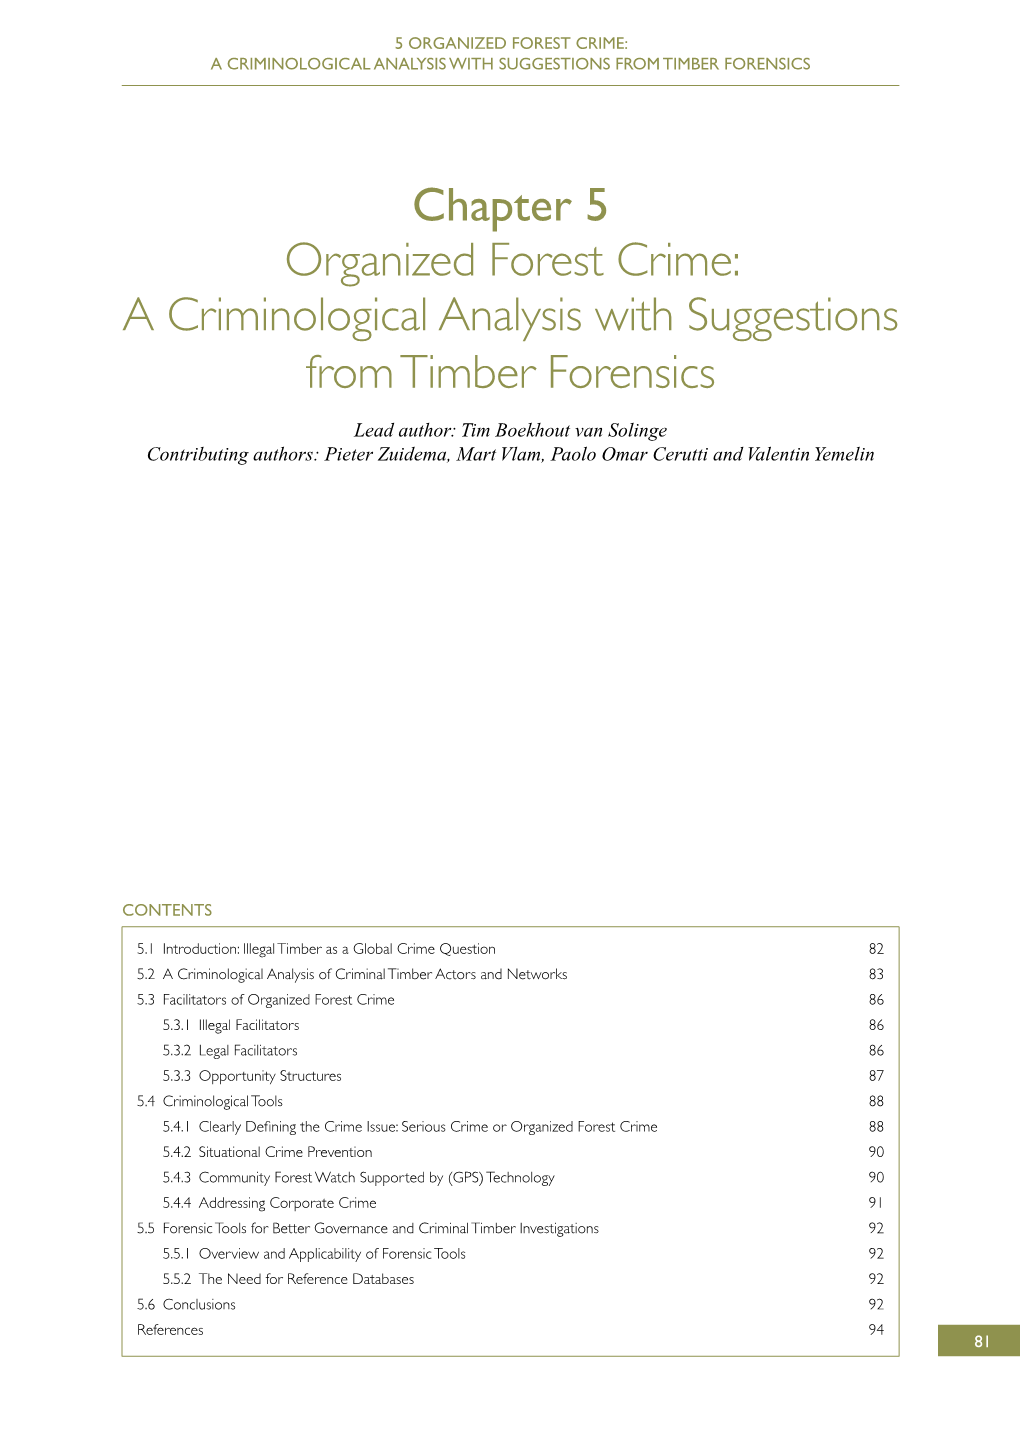 Chapter 5 Organized Forest Crime: a Criminological Analysis with Suggestions from Timber Forensics